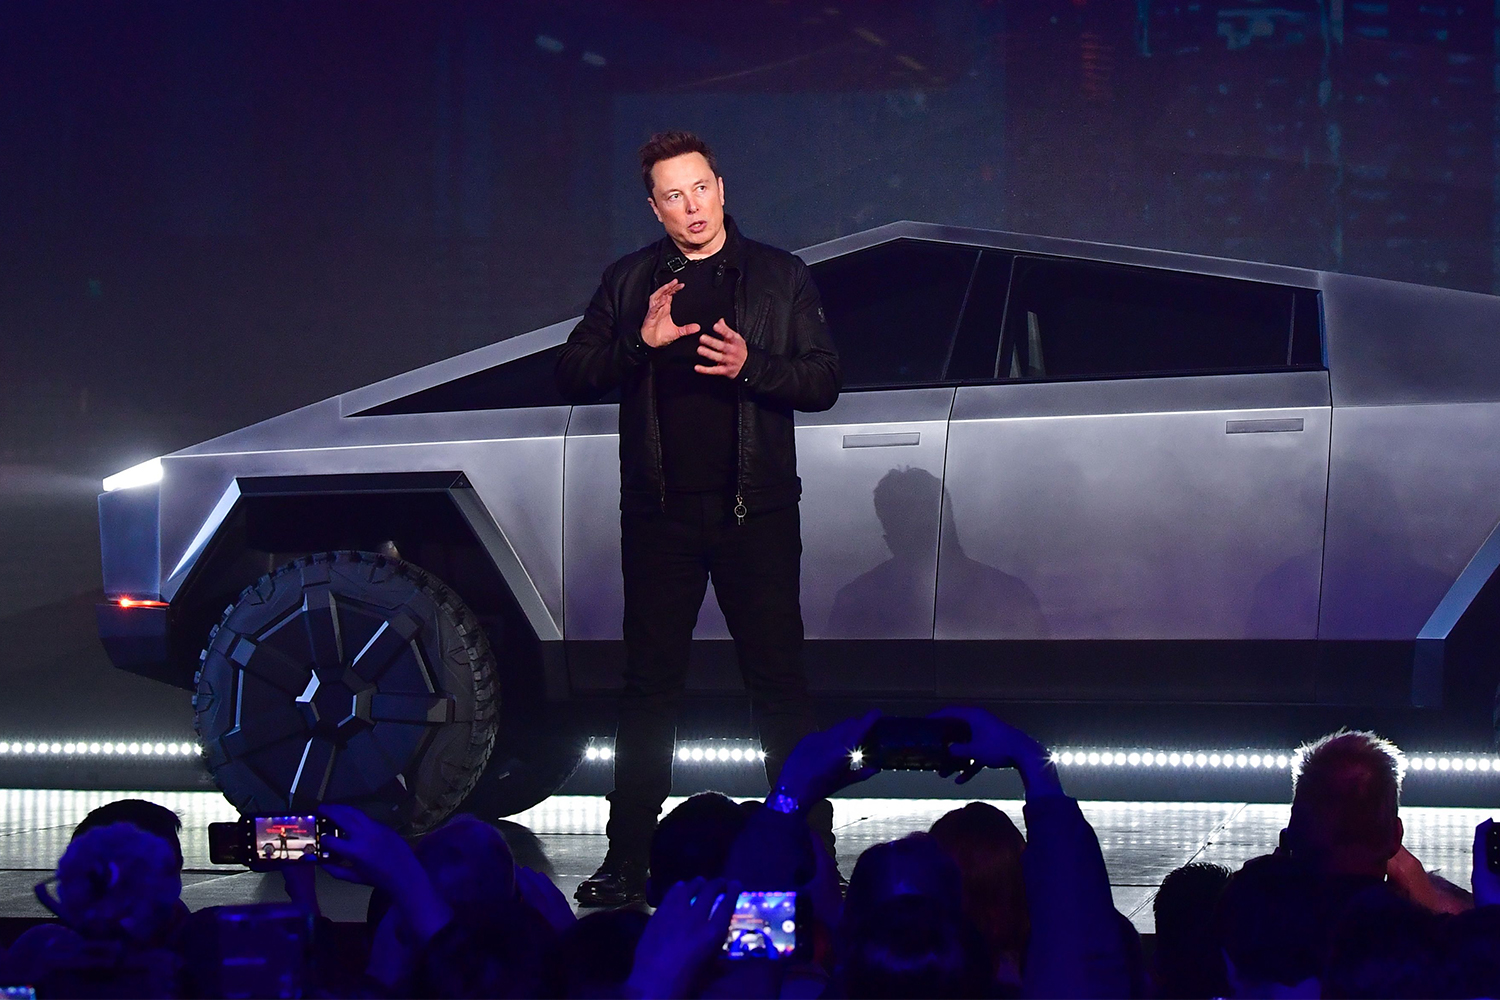 Tesla CEO Elon Musk unveiling the Cybertruck in November 2019 in Hawthorne, California. On an earnings call in January 2022, Musk said the electric pickup truck won’t be produced until at least 2023.